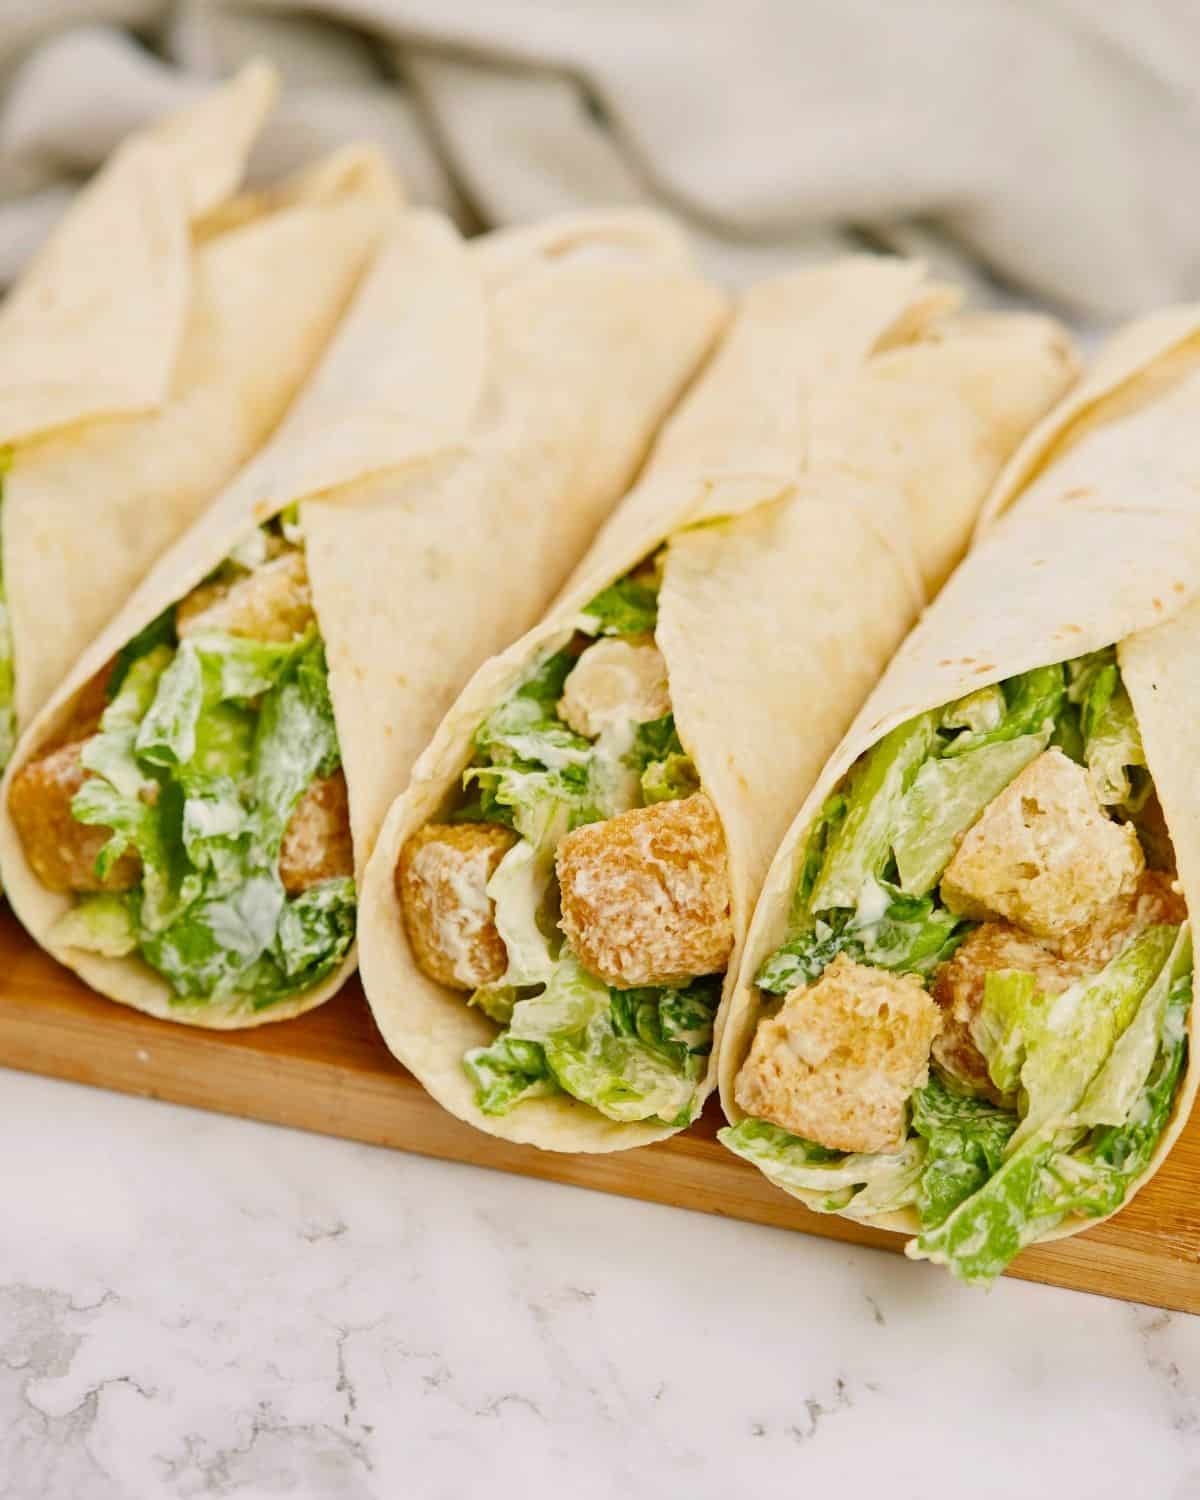 wraps filled with lettuce and tofu on wood board